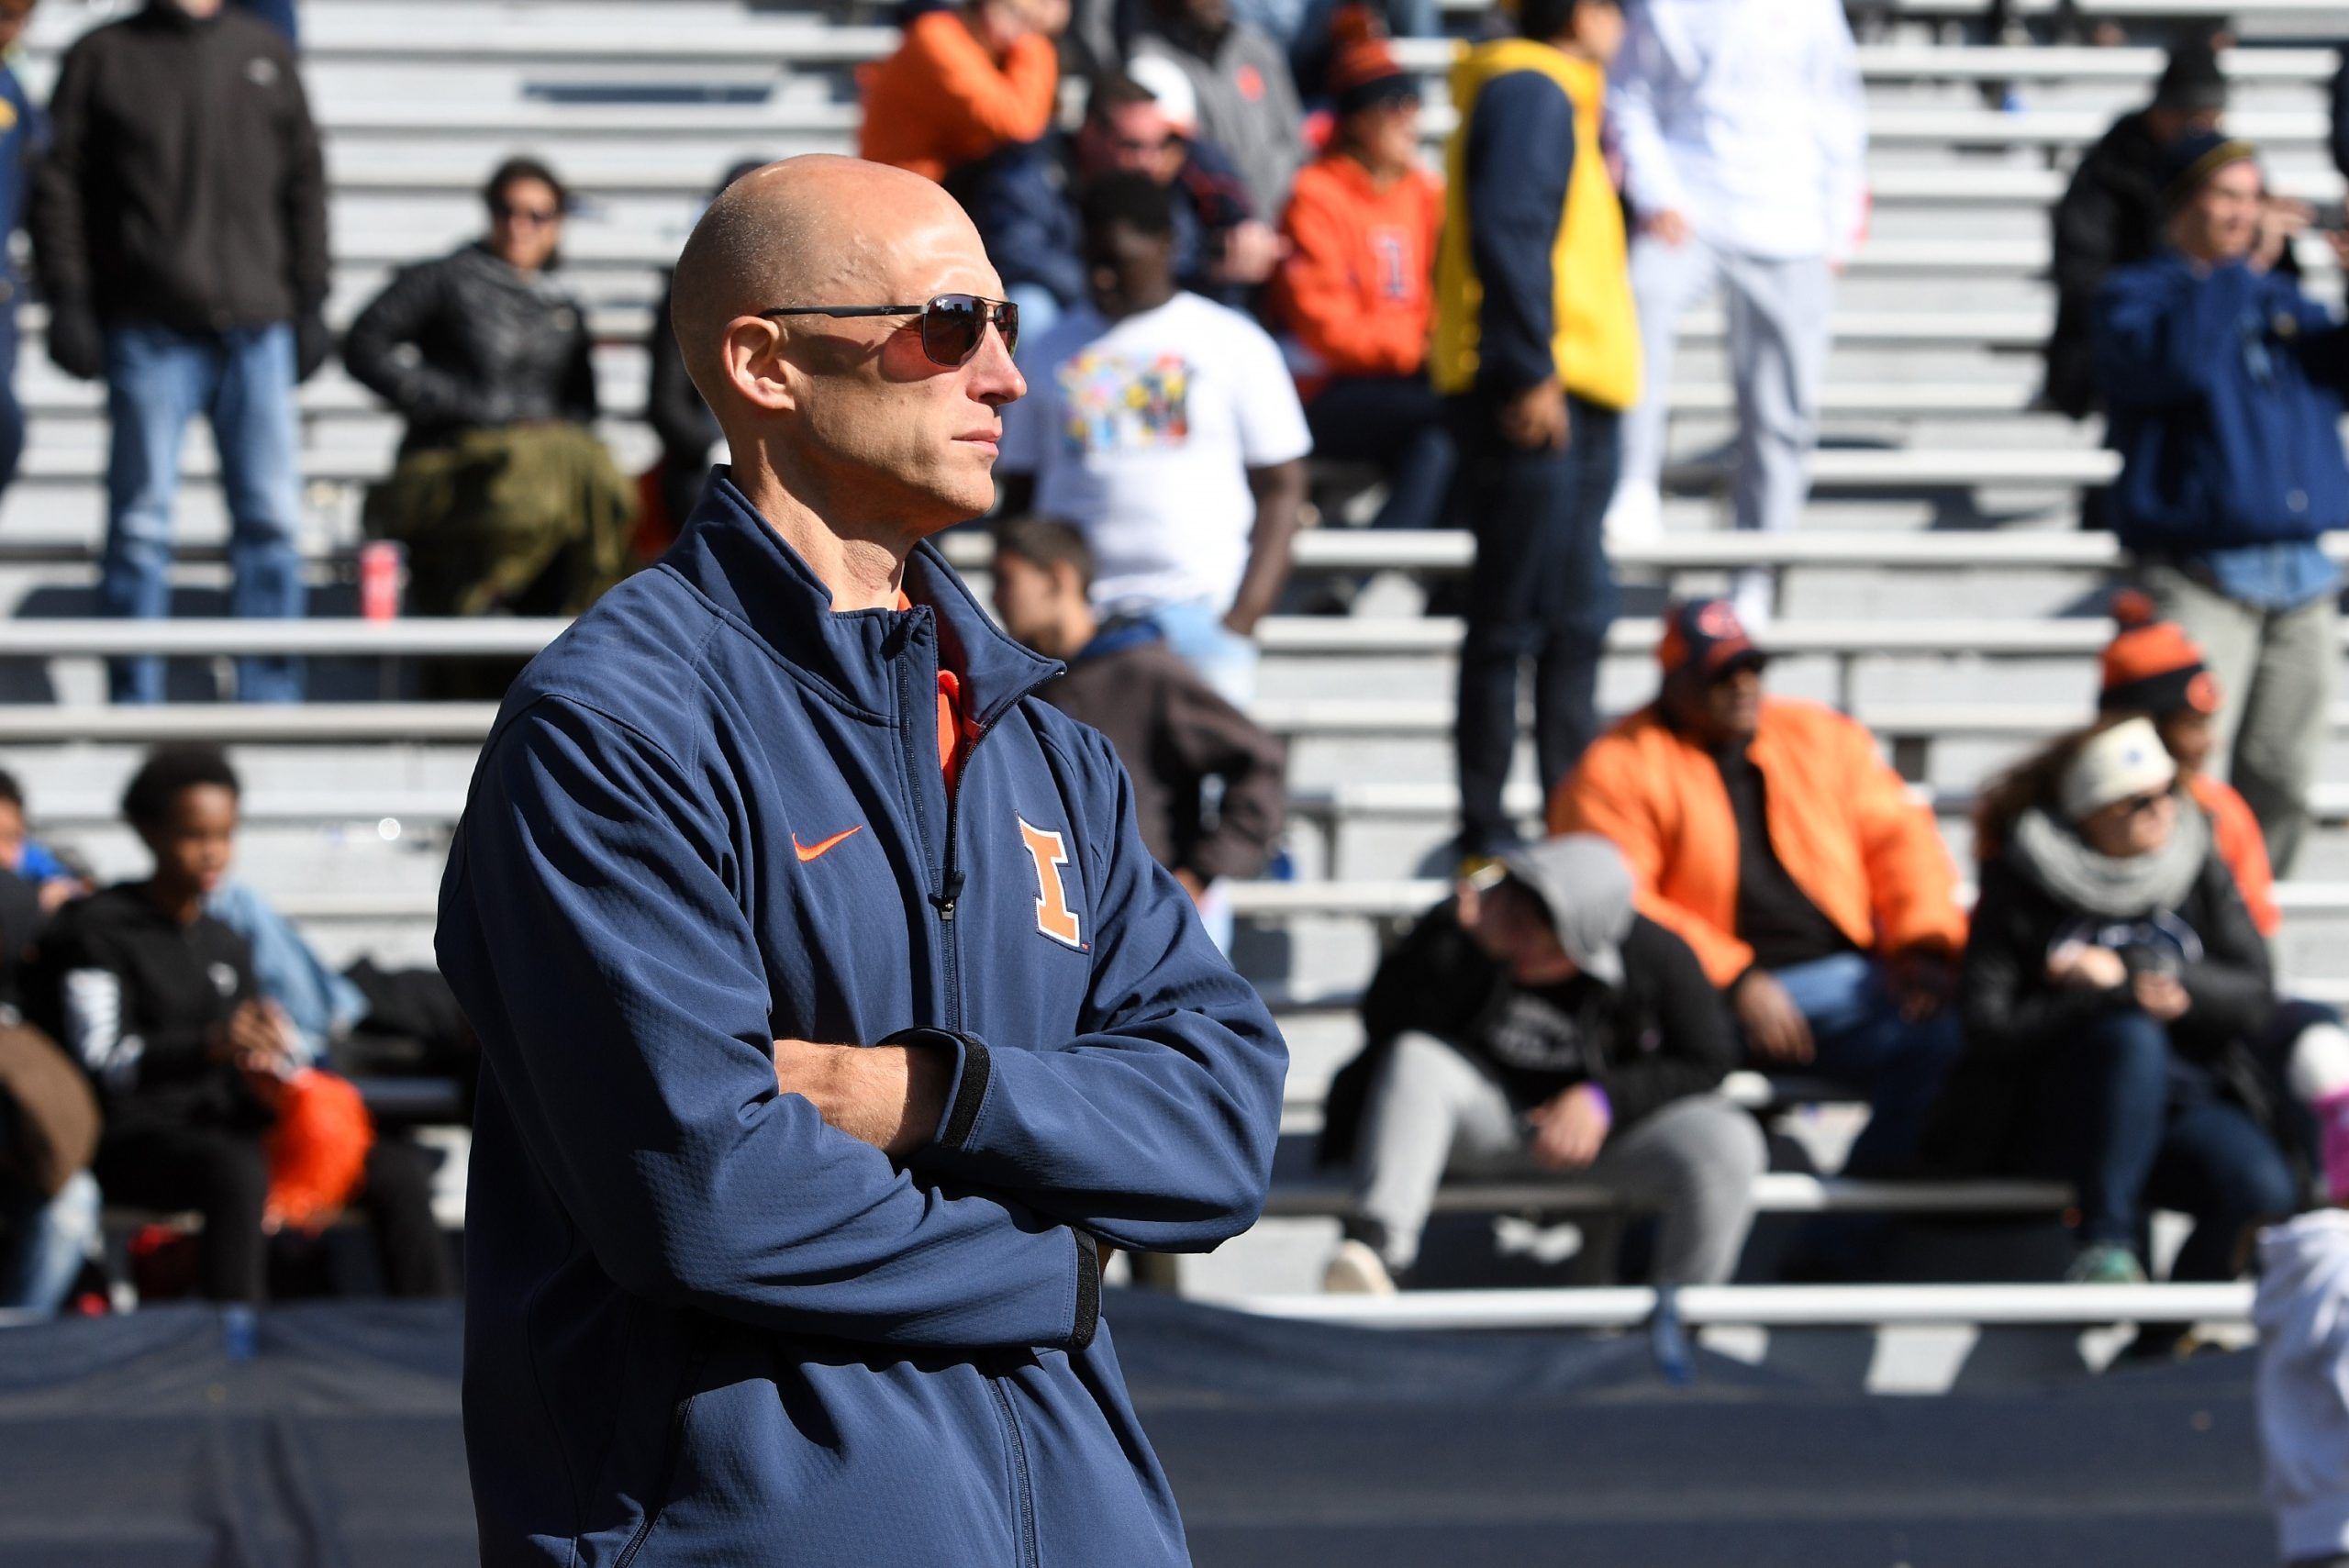 Illini AD Josh Whitman & Big Ten Officials Remain Silent on League’s Long-Form Media Rights Deal